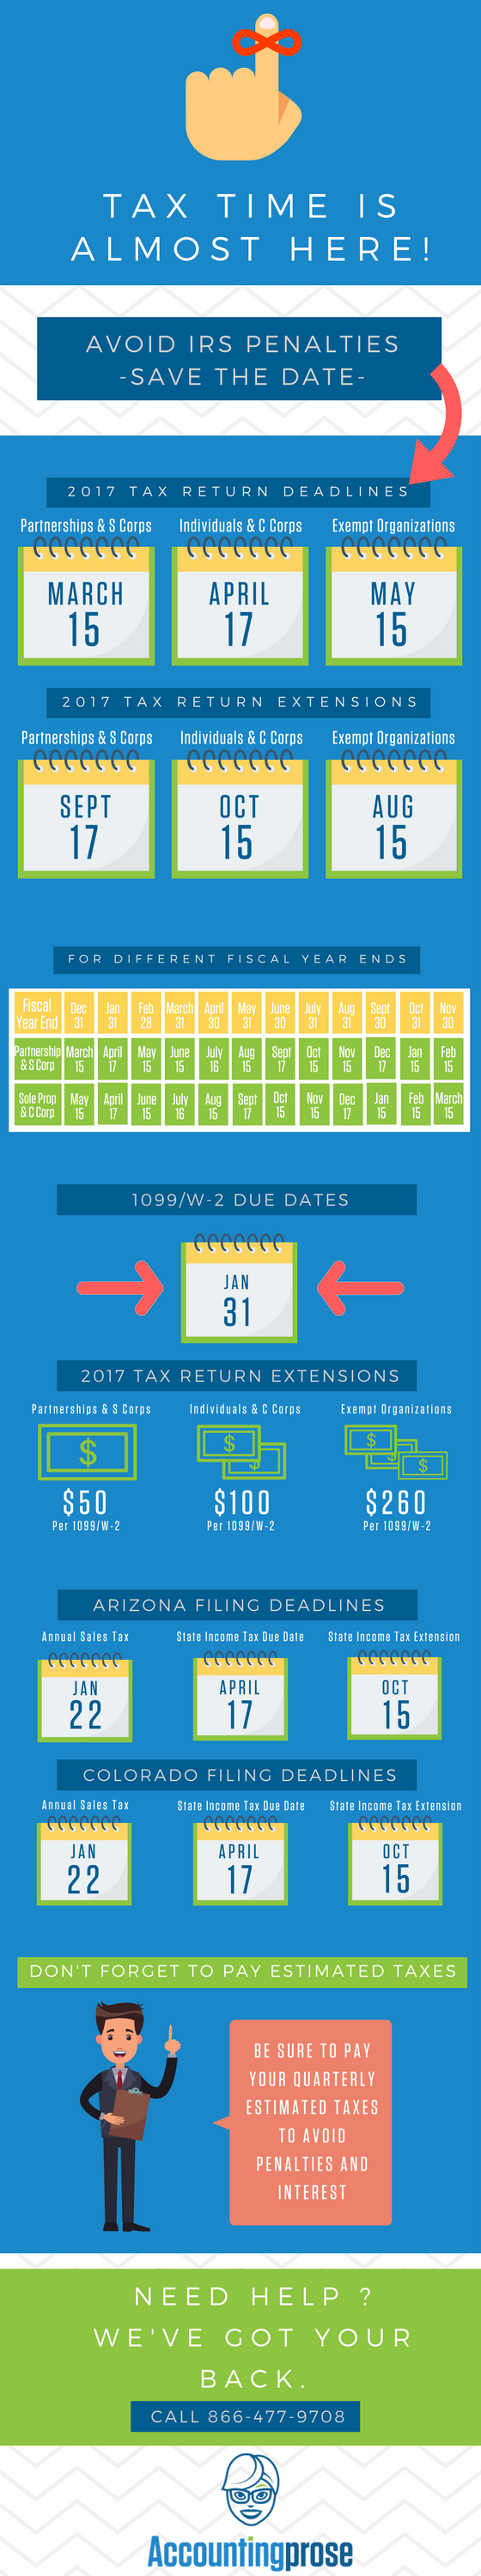 Image Depicting Tax Deadlines for Partnerships, Individuals, Exempt Organizations, and Tax Return Extensions in Arizona and Colorado for 2017